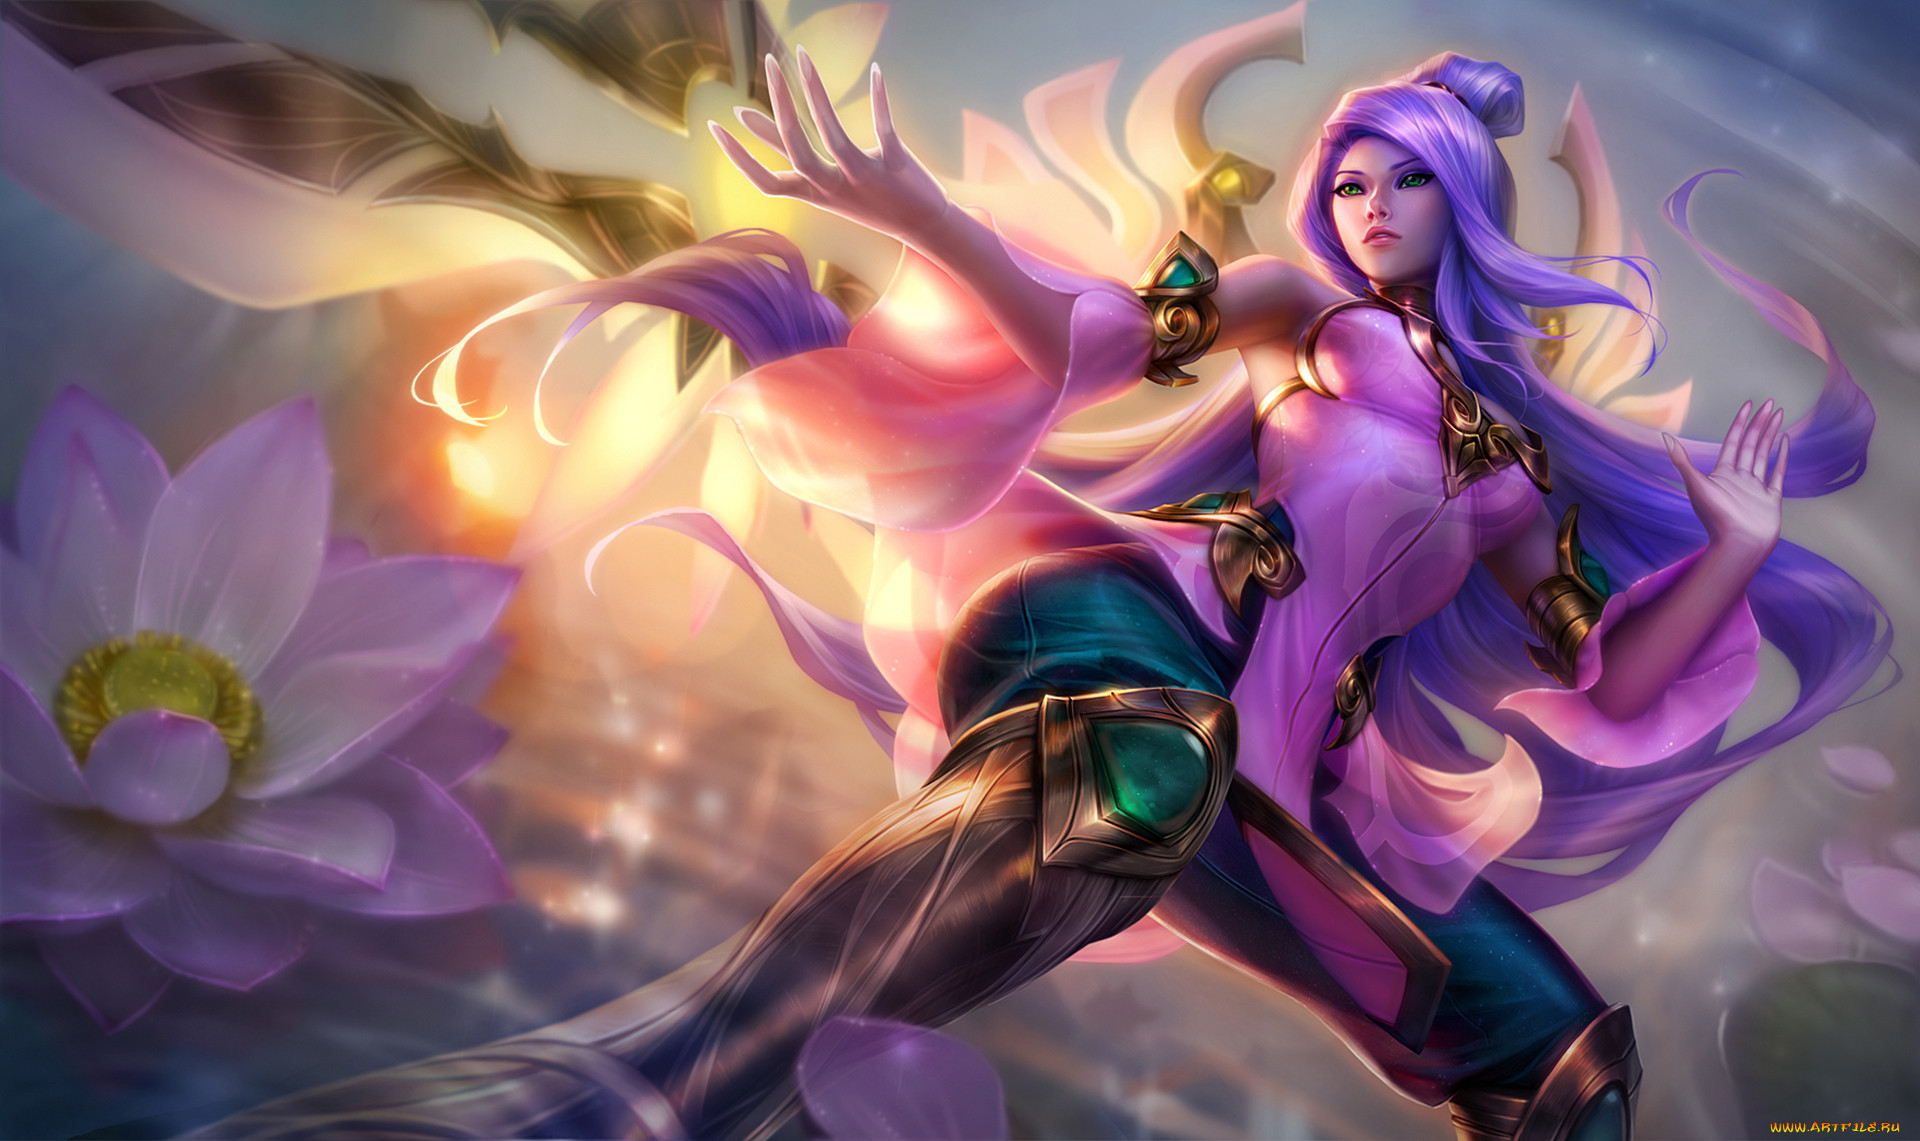  , league of legends, , order, of, the, lotus, riot, games, league, legends, will, blades, lol, irelia